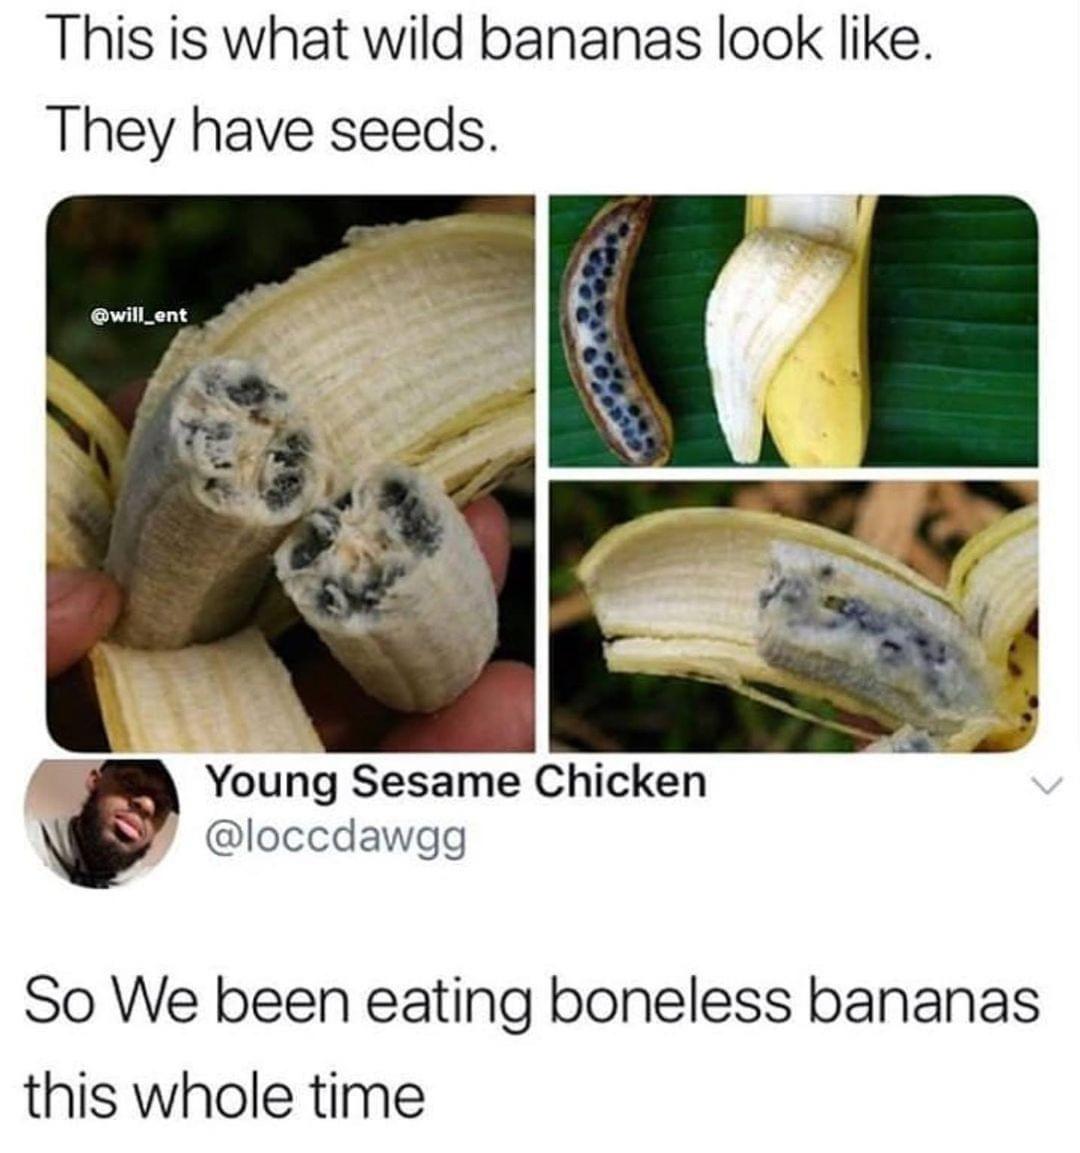 savage tweets - banana - This is what wild bananas look . They have seeds. Young Sesame Chicken So We been eating boneless bananas this whole time